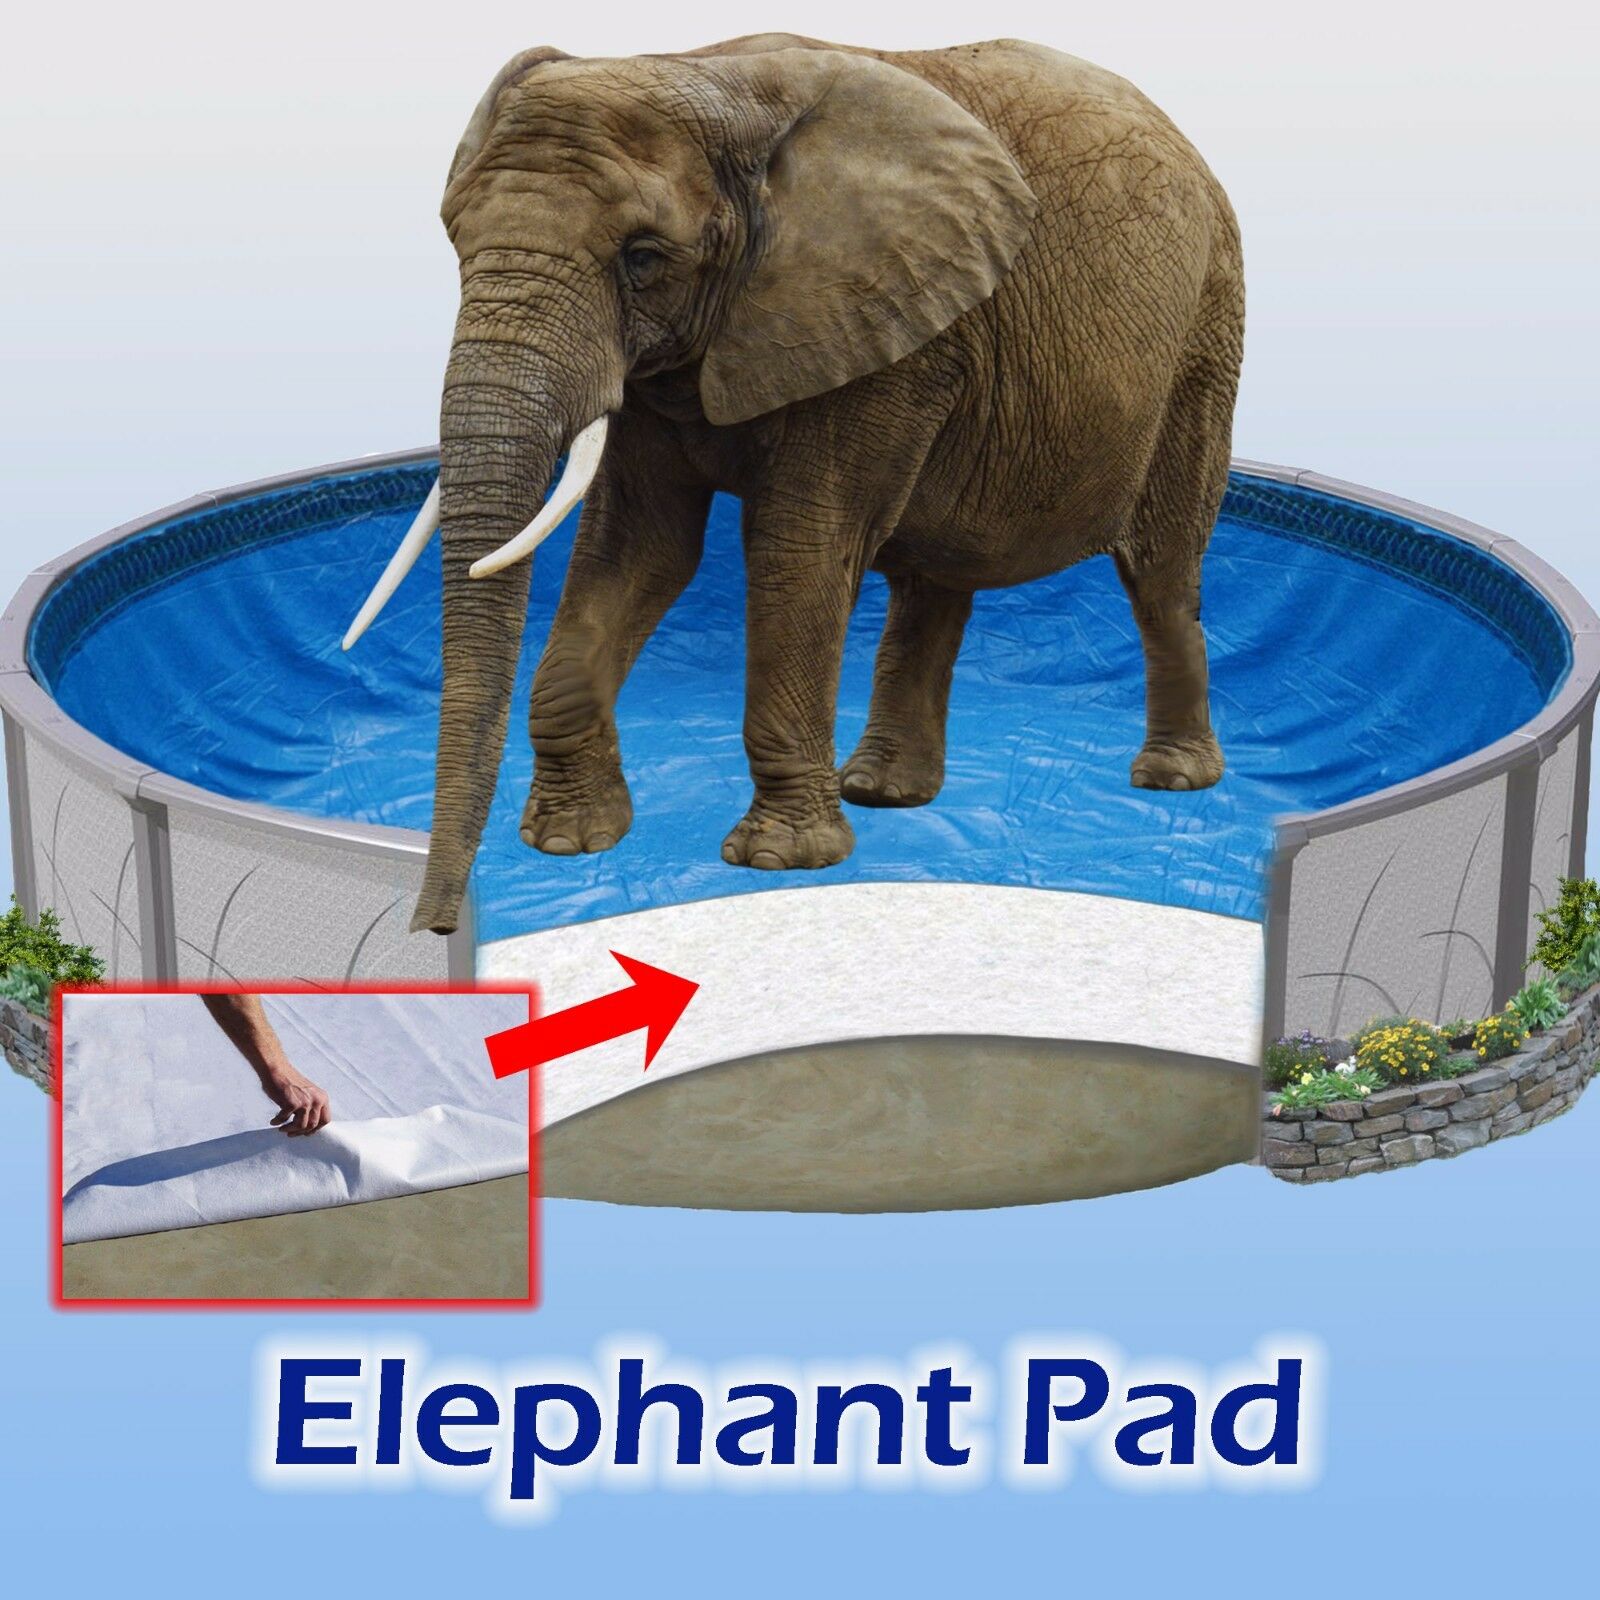 Pool Liner Pad - Elephant Beats Gorilla - Guard Armor Shield Liners - All Sizes